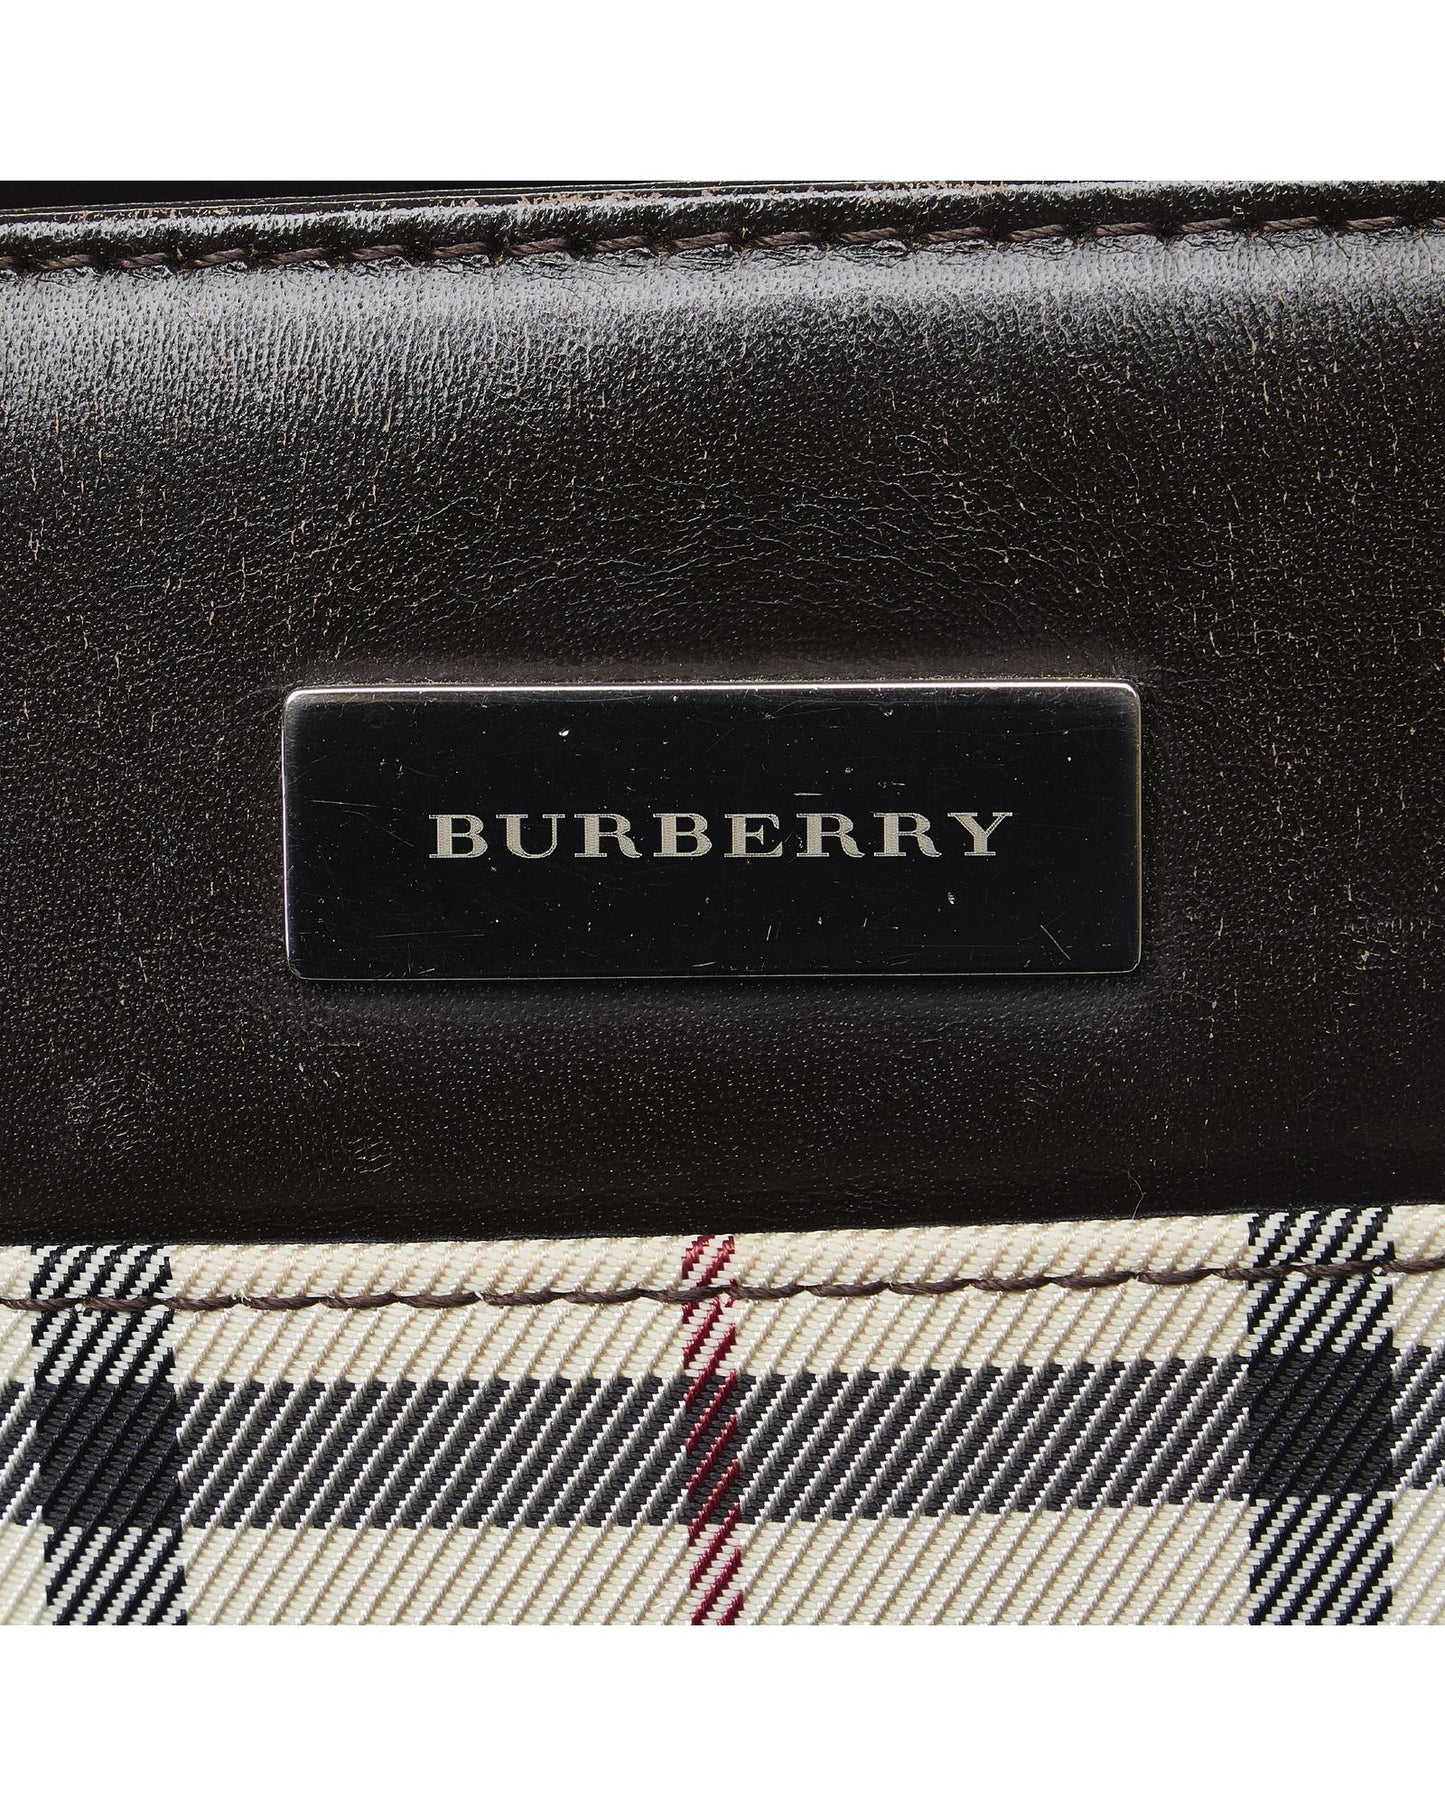 Burberry Women's Canvas and Leather Handbag in Brown